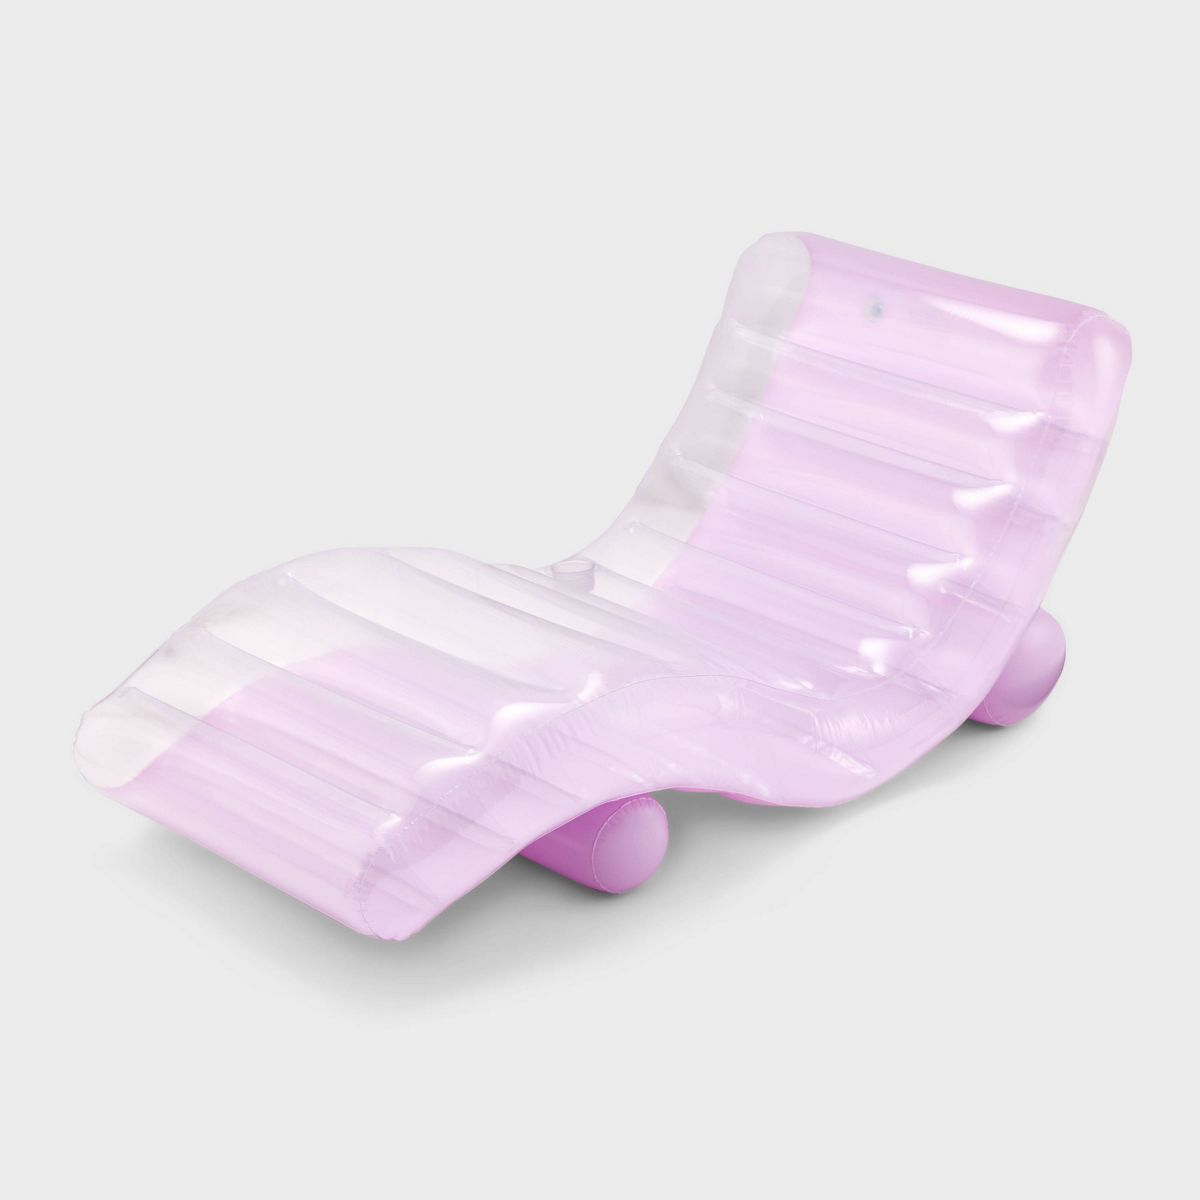 Inflatable Chaise Lounger Float - Sun Squad™ | Target